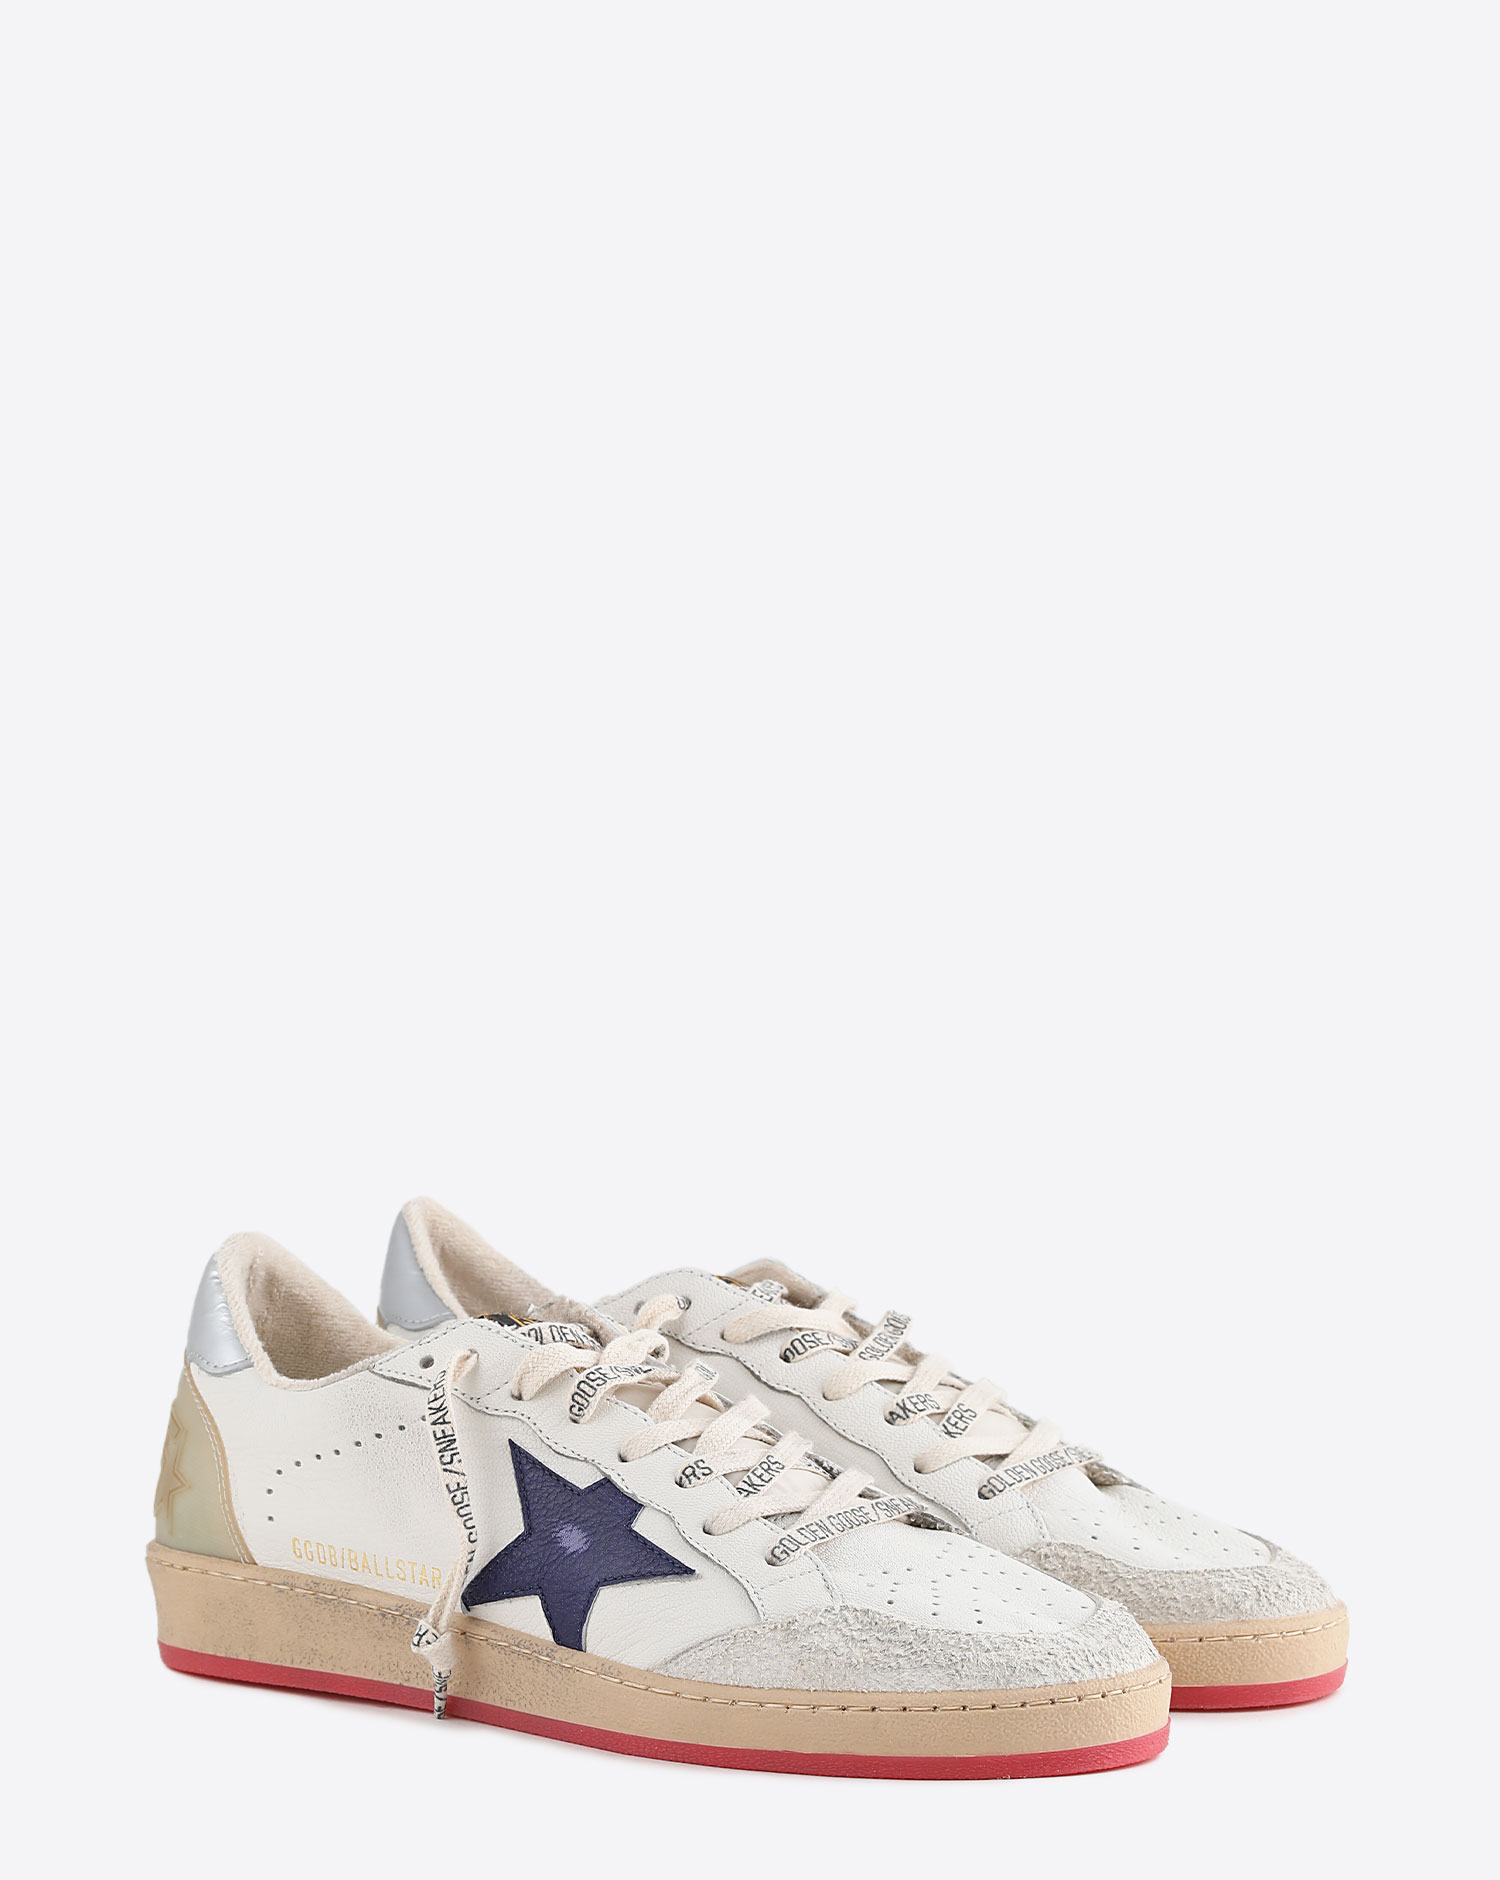 Sneakers Golden Goose Ball Star White Violet Silver 11379